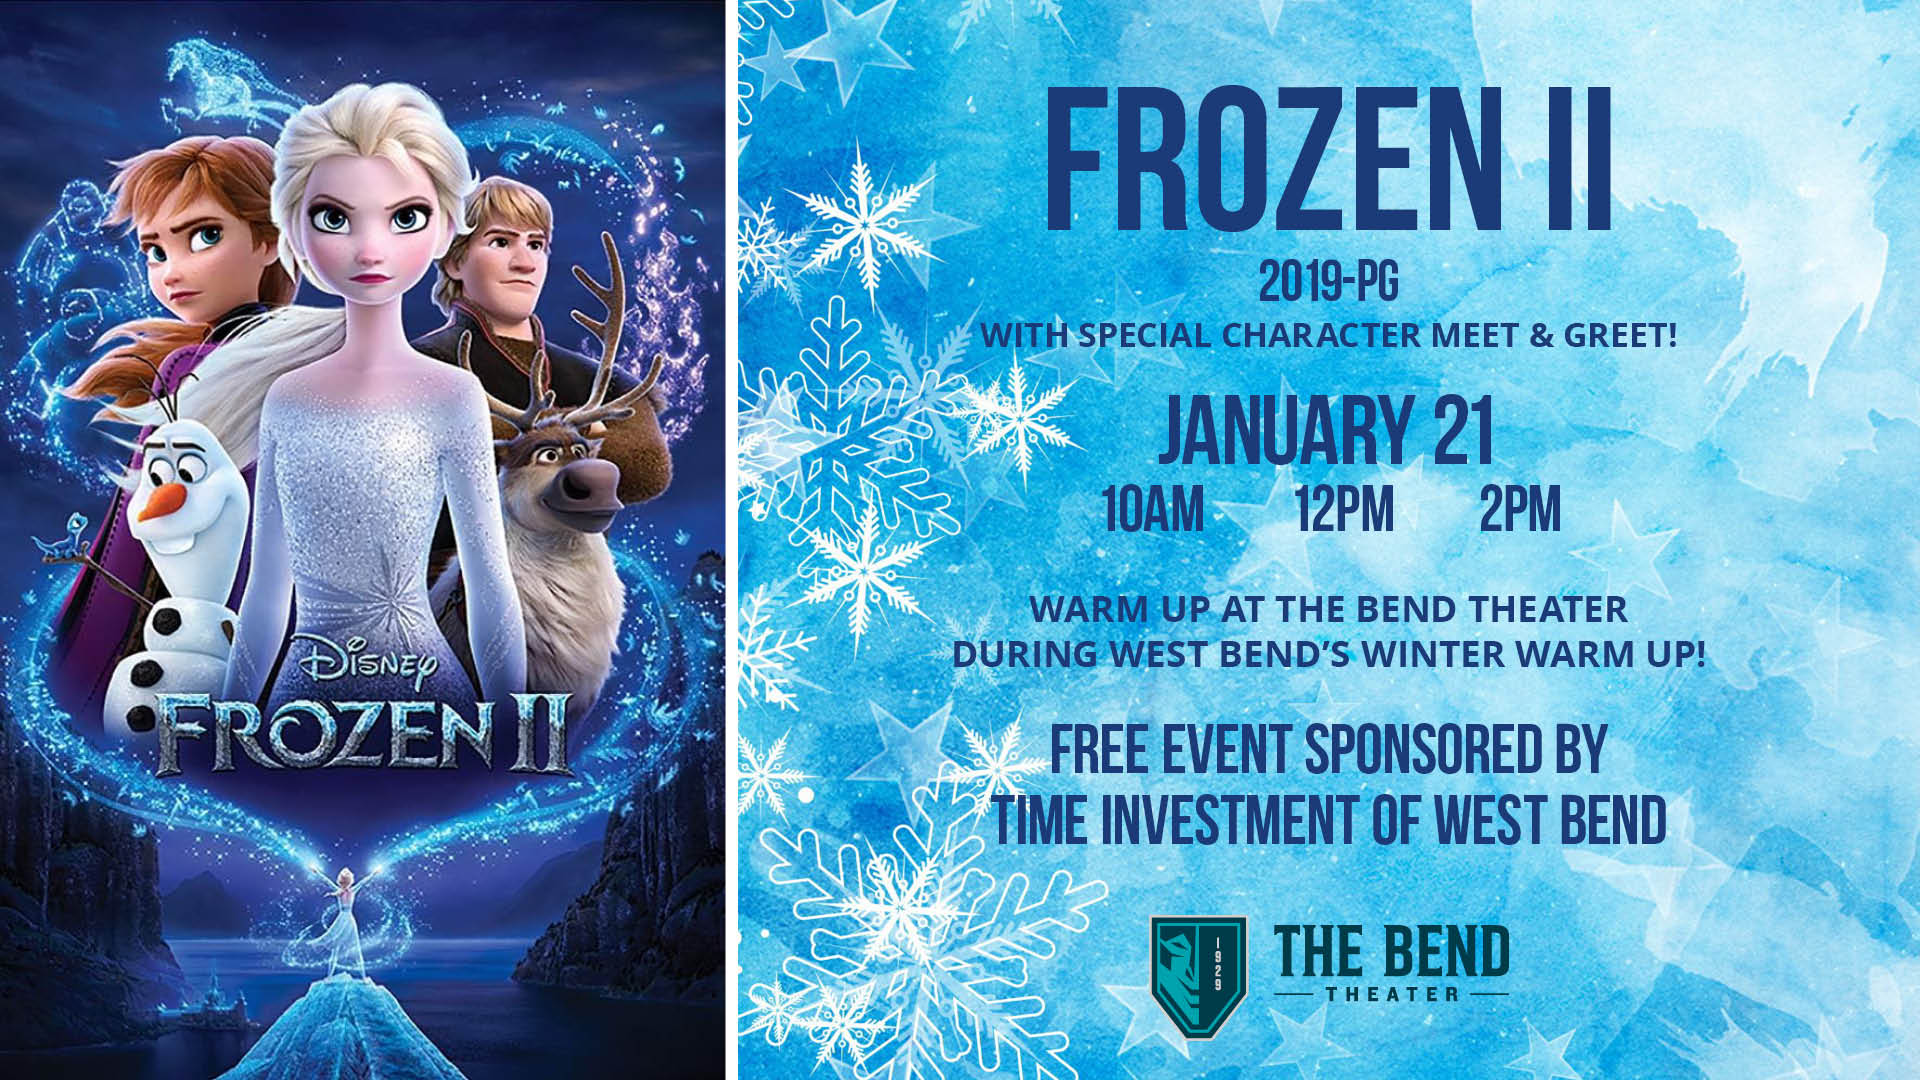 Frozen II - Winter Warm Up Movie - Free Event Sponsored by Time Investment